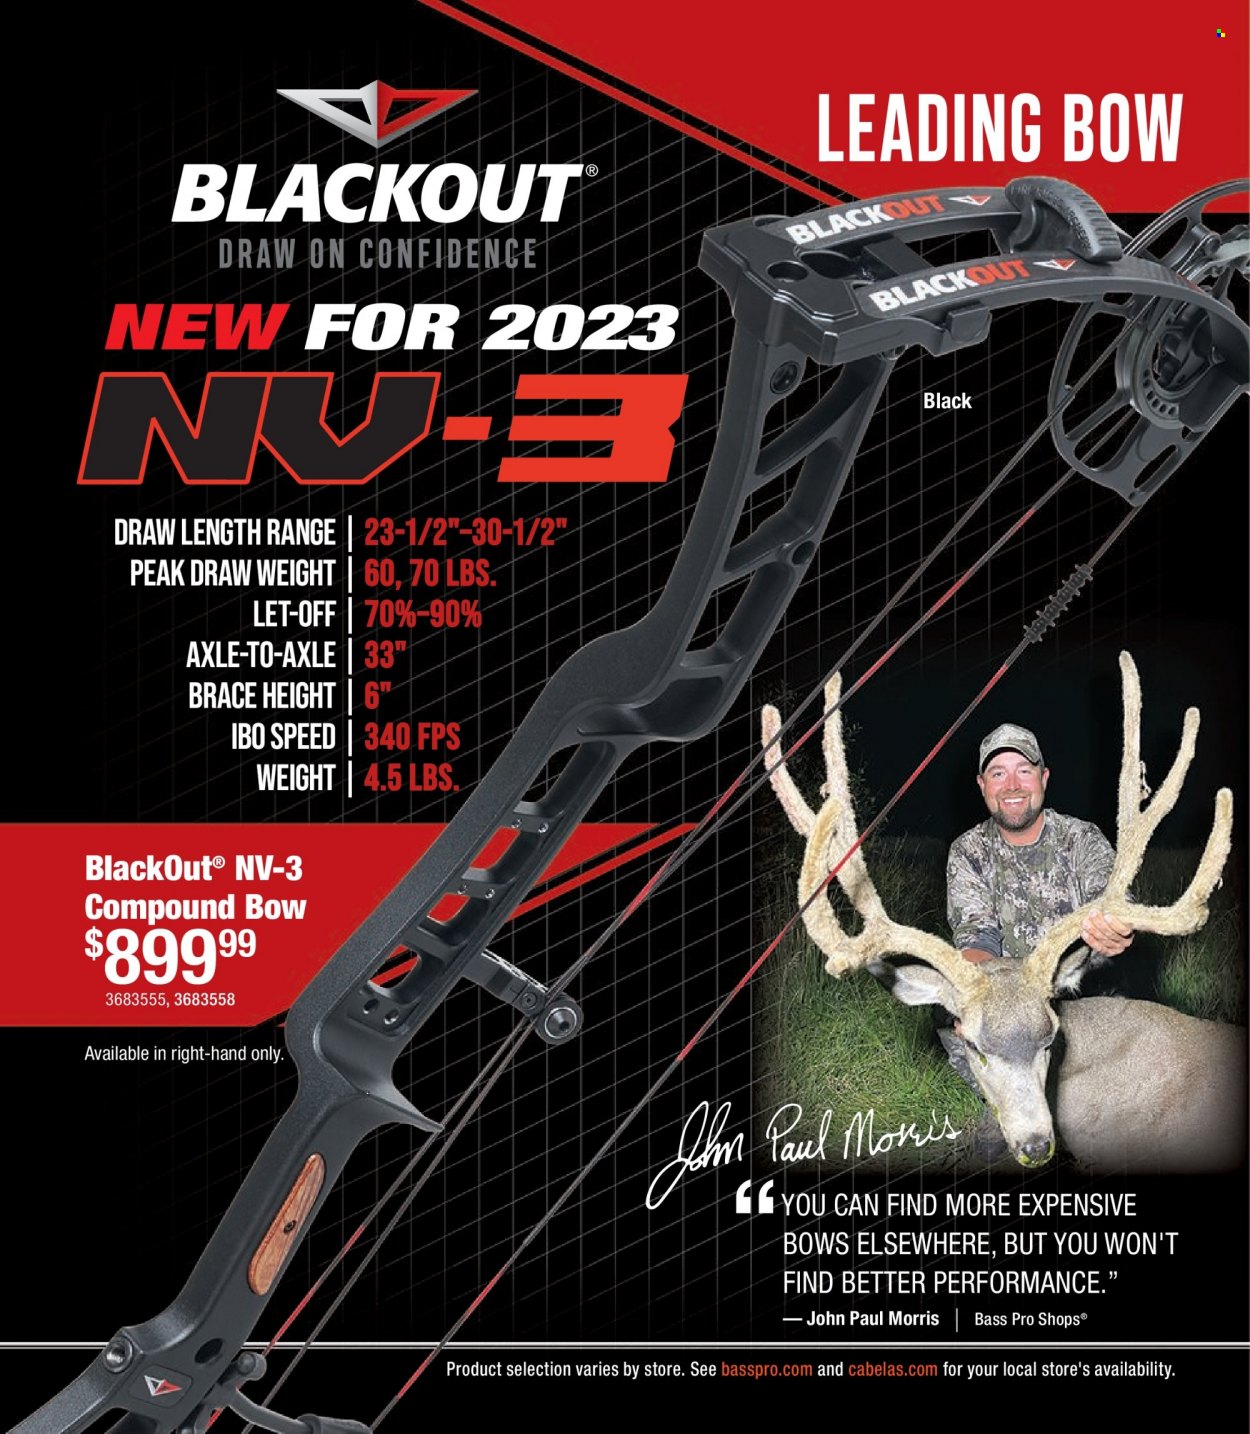 Bass Pro Shops flyer . Page 44.